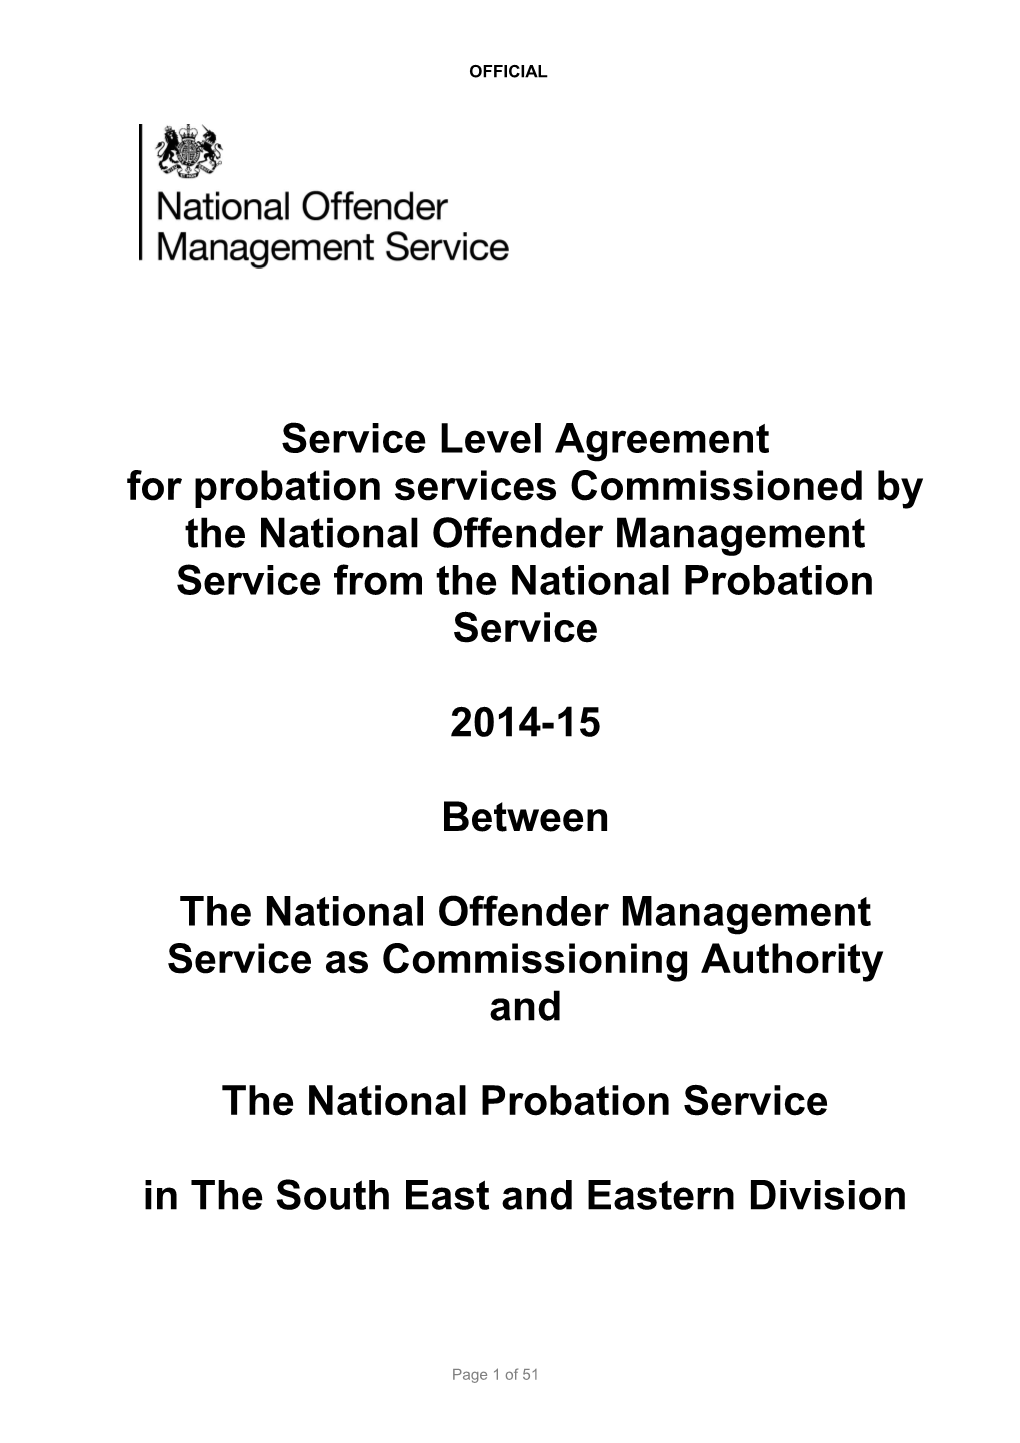 NPS Service Level Agreement 2014-15 SOUTH EAST/EASTERN